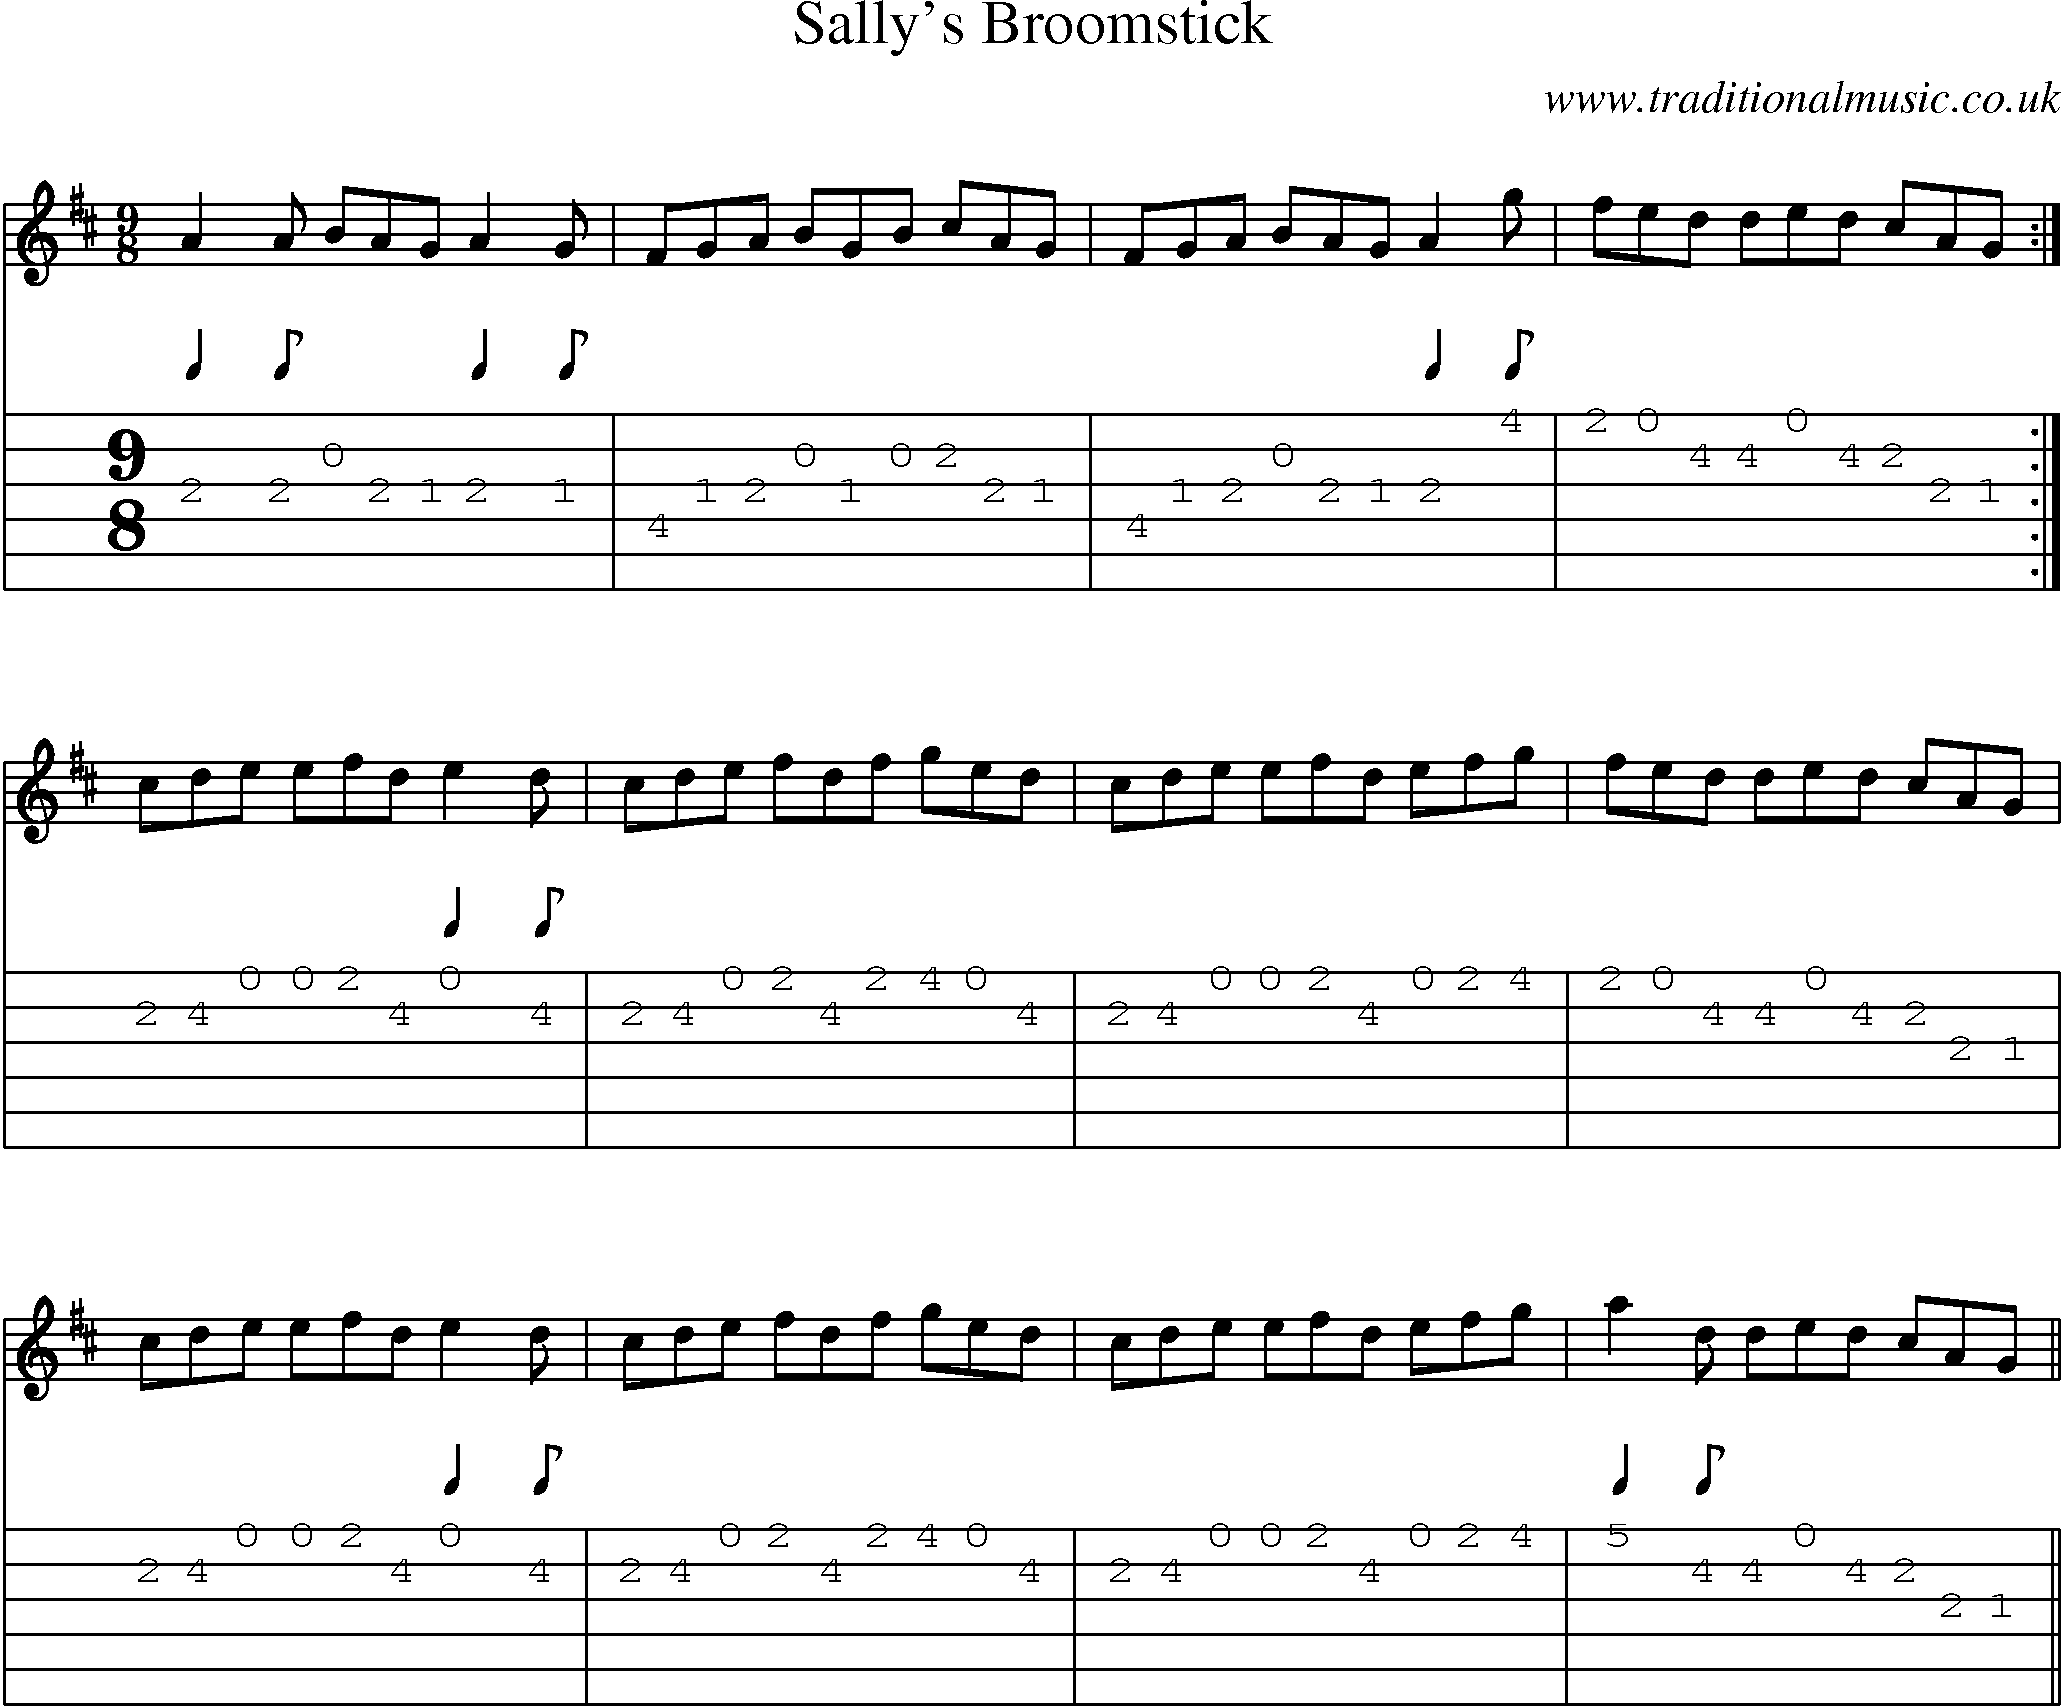 Music Score and Guitar Tabs for Sallys Broomstick